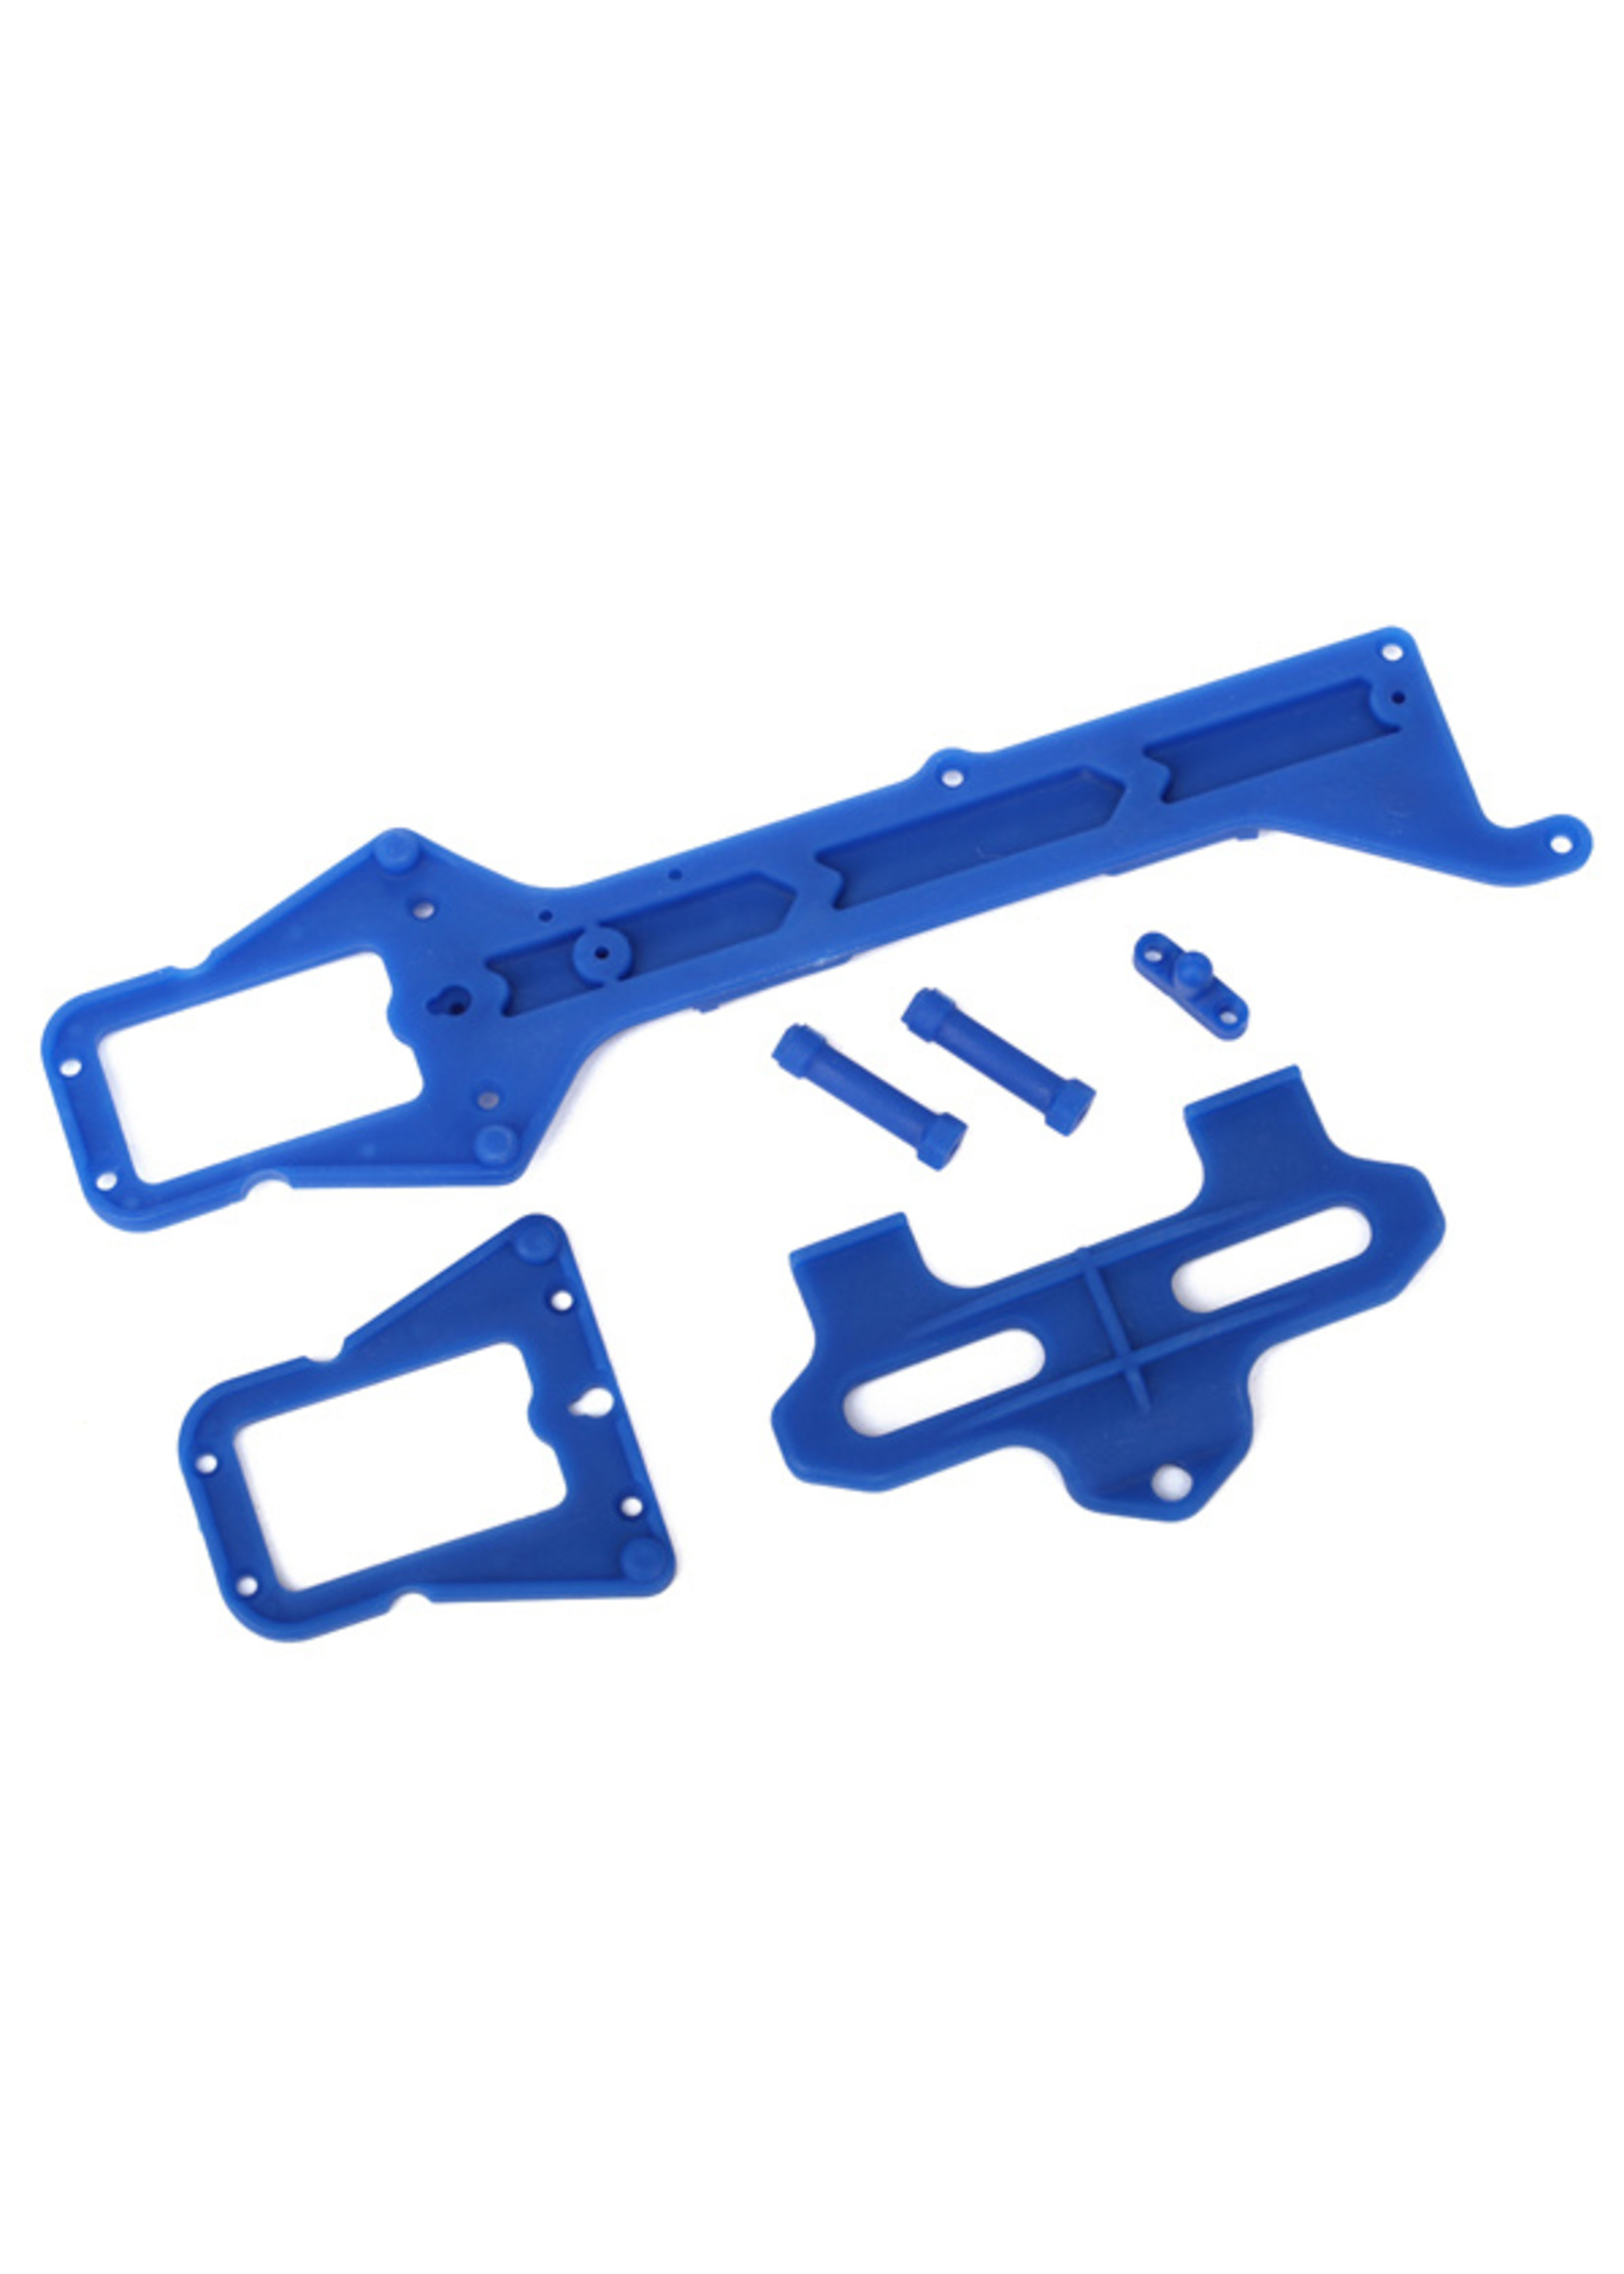 Traxxas 7523 - Upper Chassis / Battery Hold Down